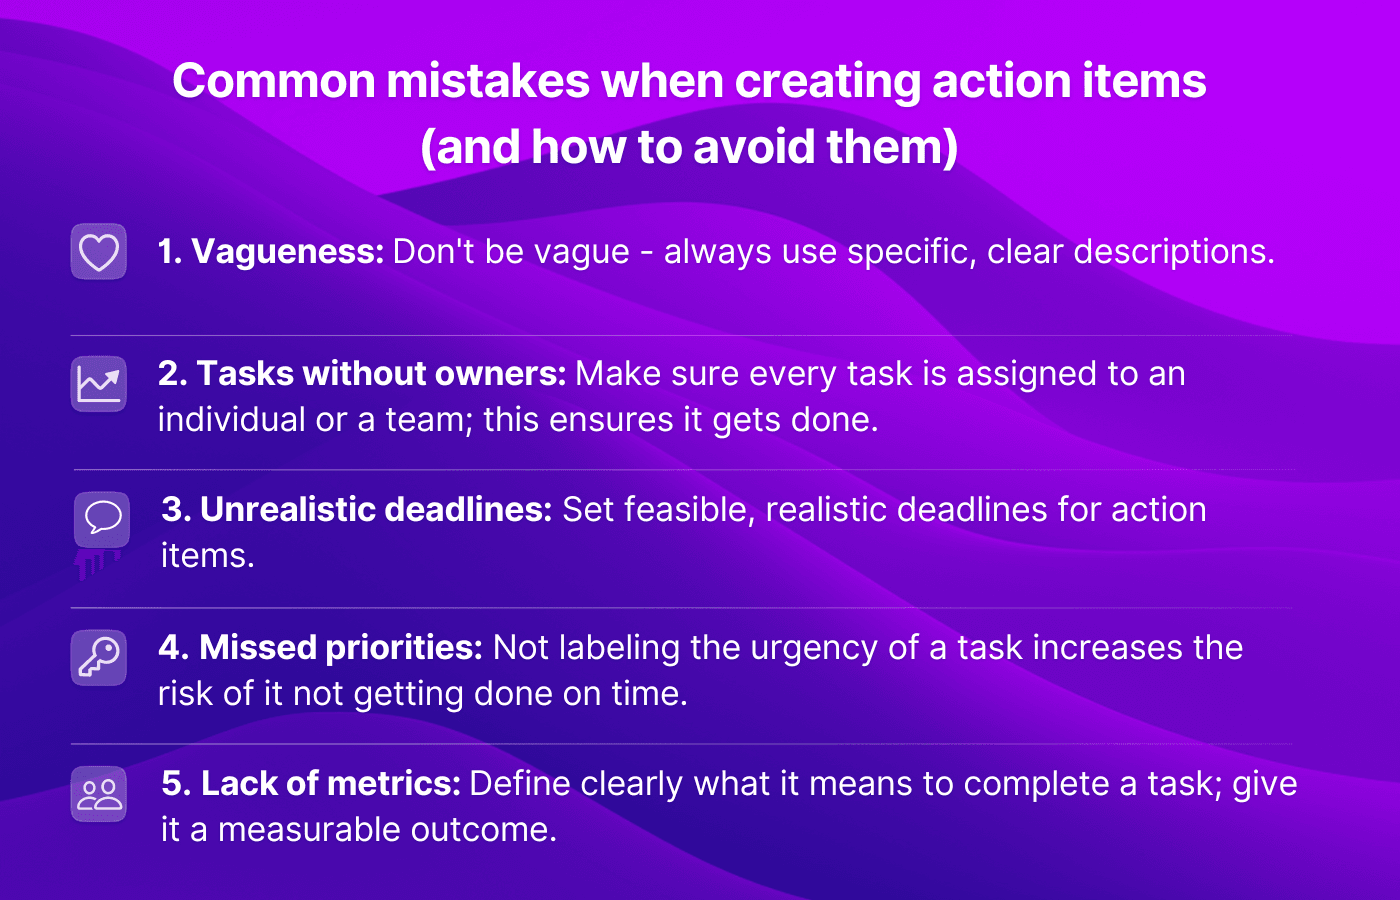 An infographic of mistakes when creating action items